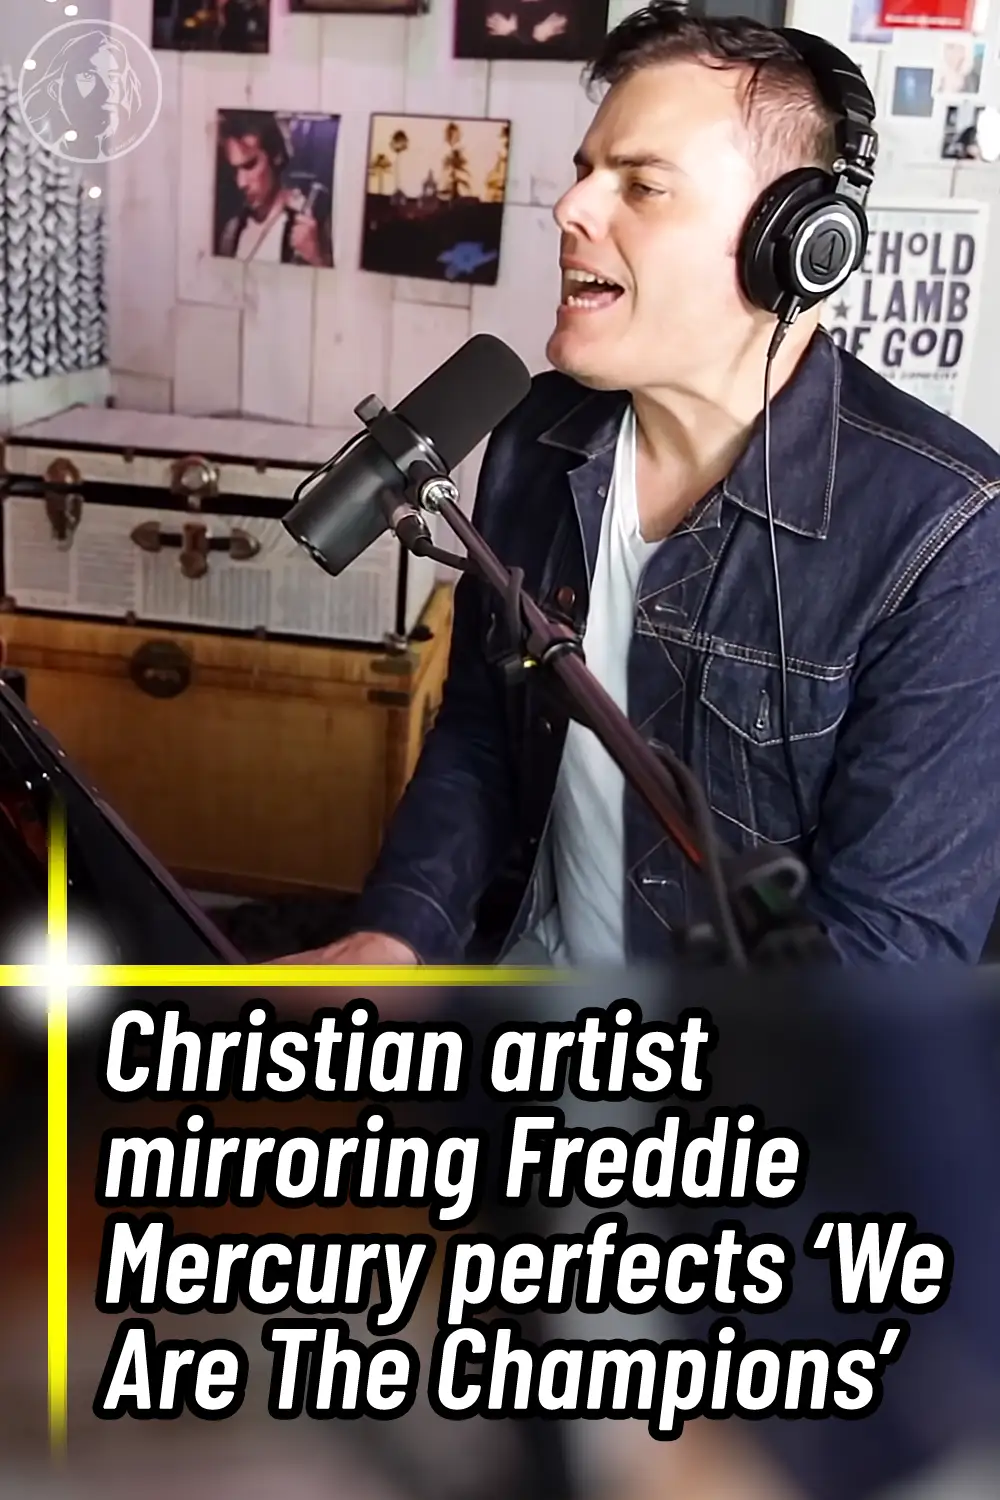 Christian artist mirroring Freddie Mercury perfects ‘We Are The Champions’